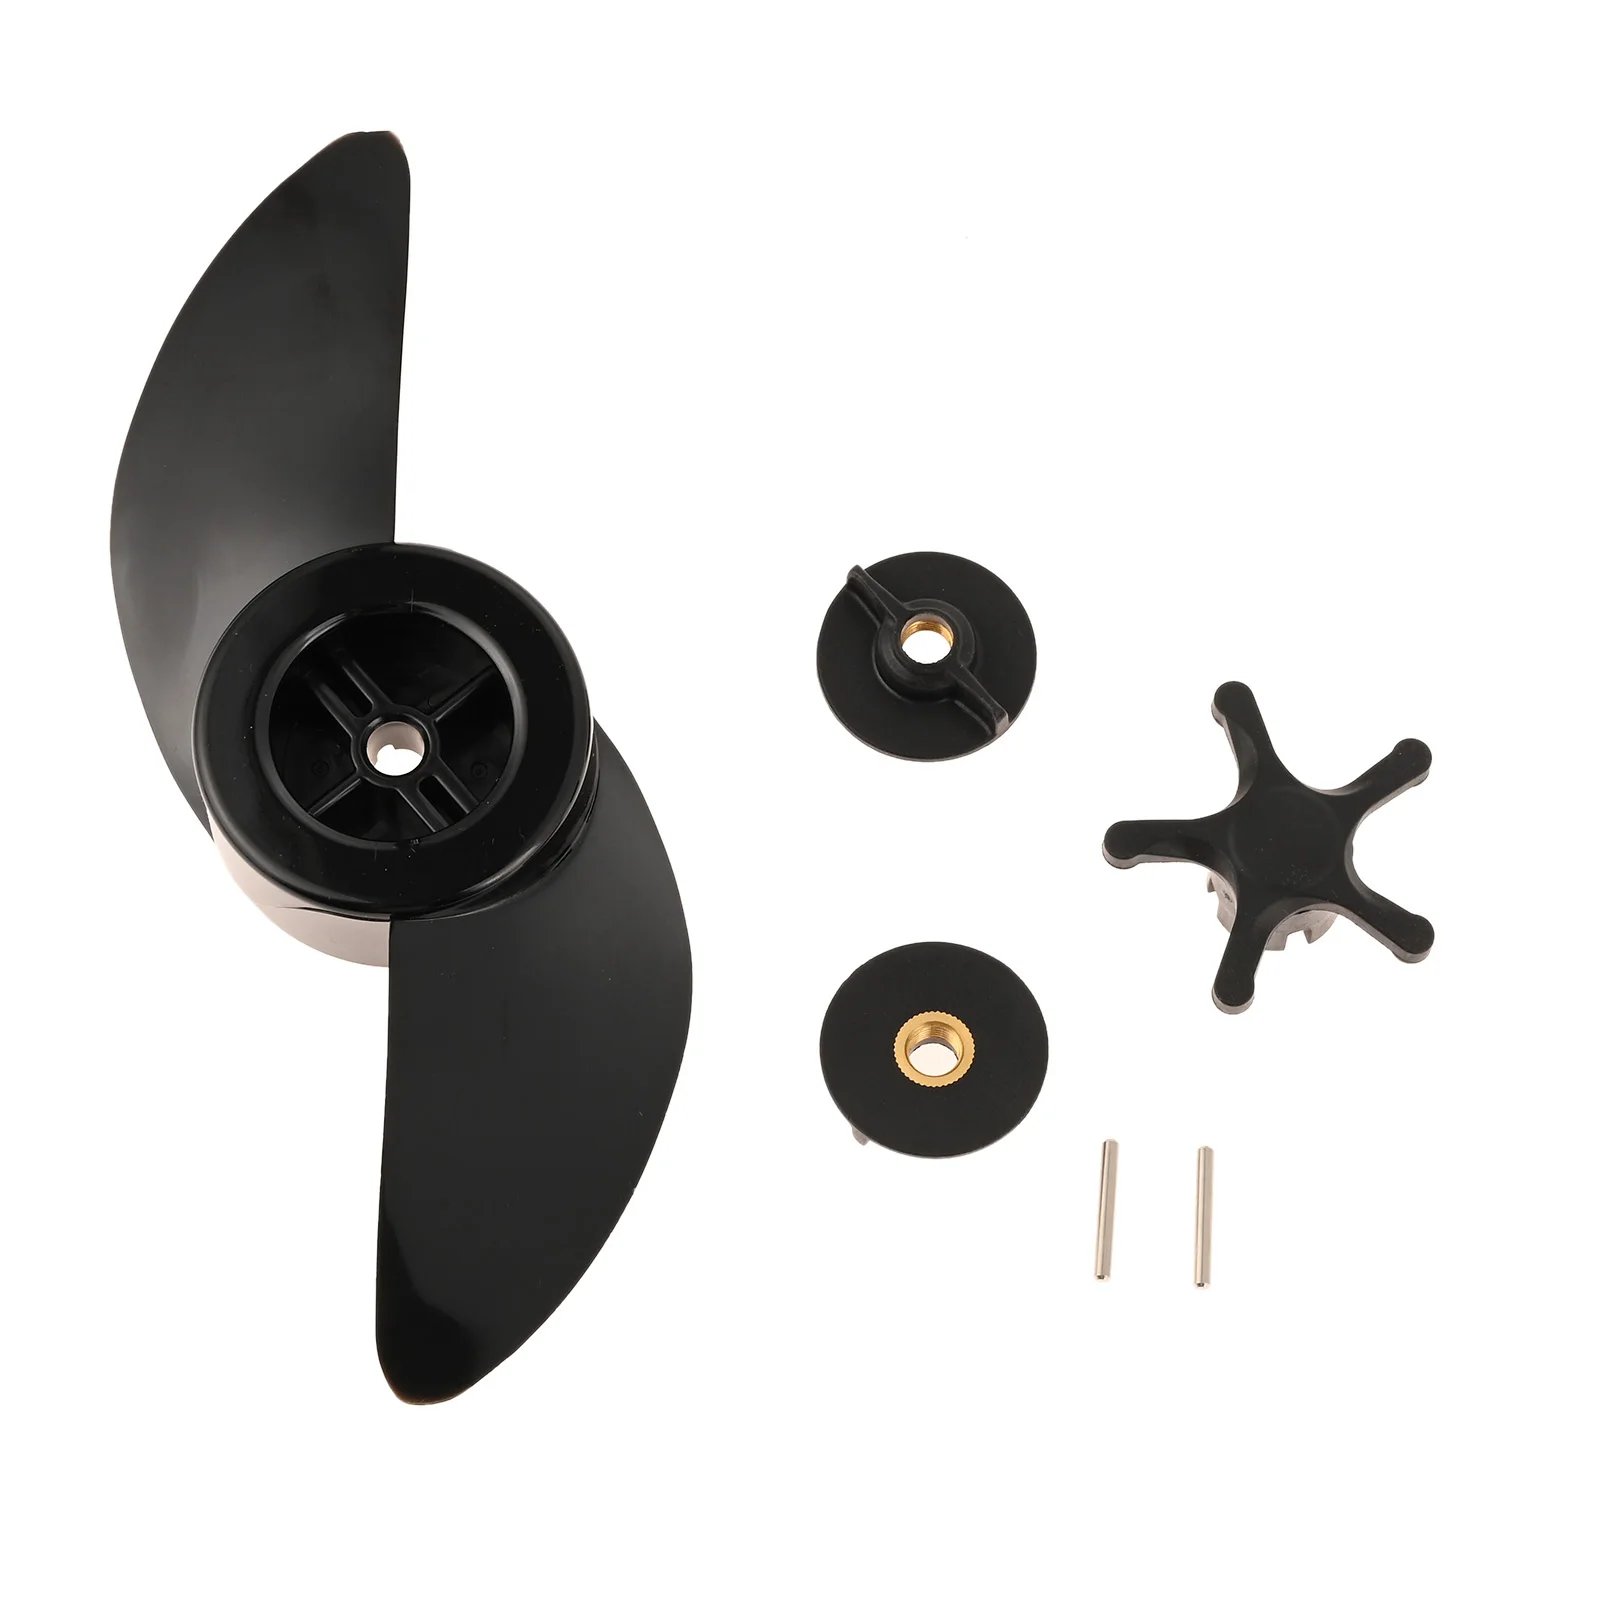 1 Set Boat Two-Blade Propeller Electronic Motor Plastic HAIBO T34 Boat System Propeller For 28lb 30lb 34lb Motors Boat Kayak 1pc 30 teeth car electric side view mirror motor gear for hyundais santafes plastic folding motors gears autos replacements part